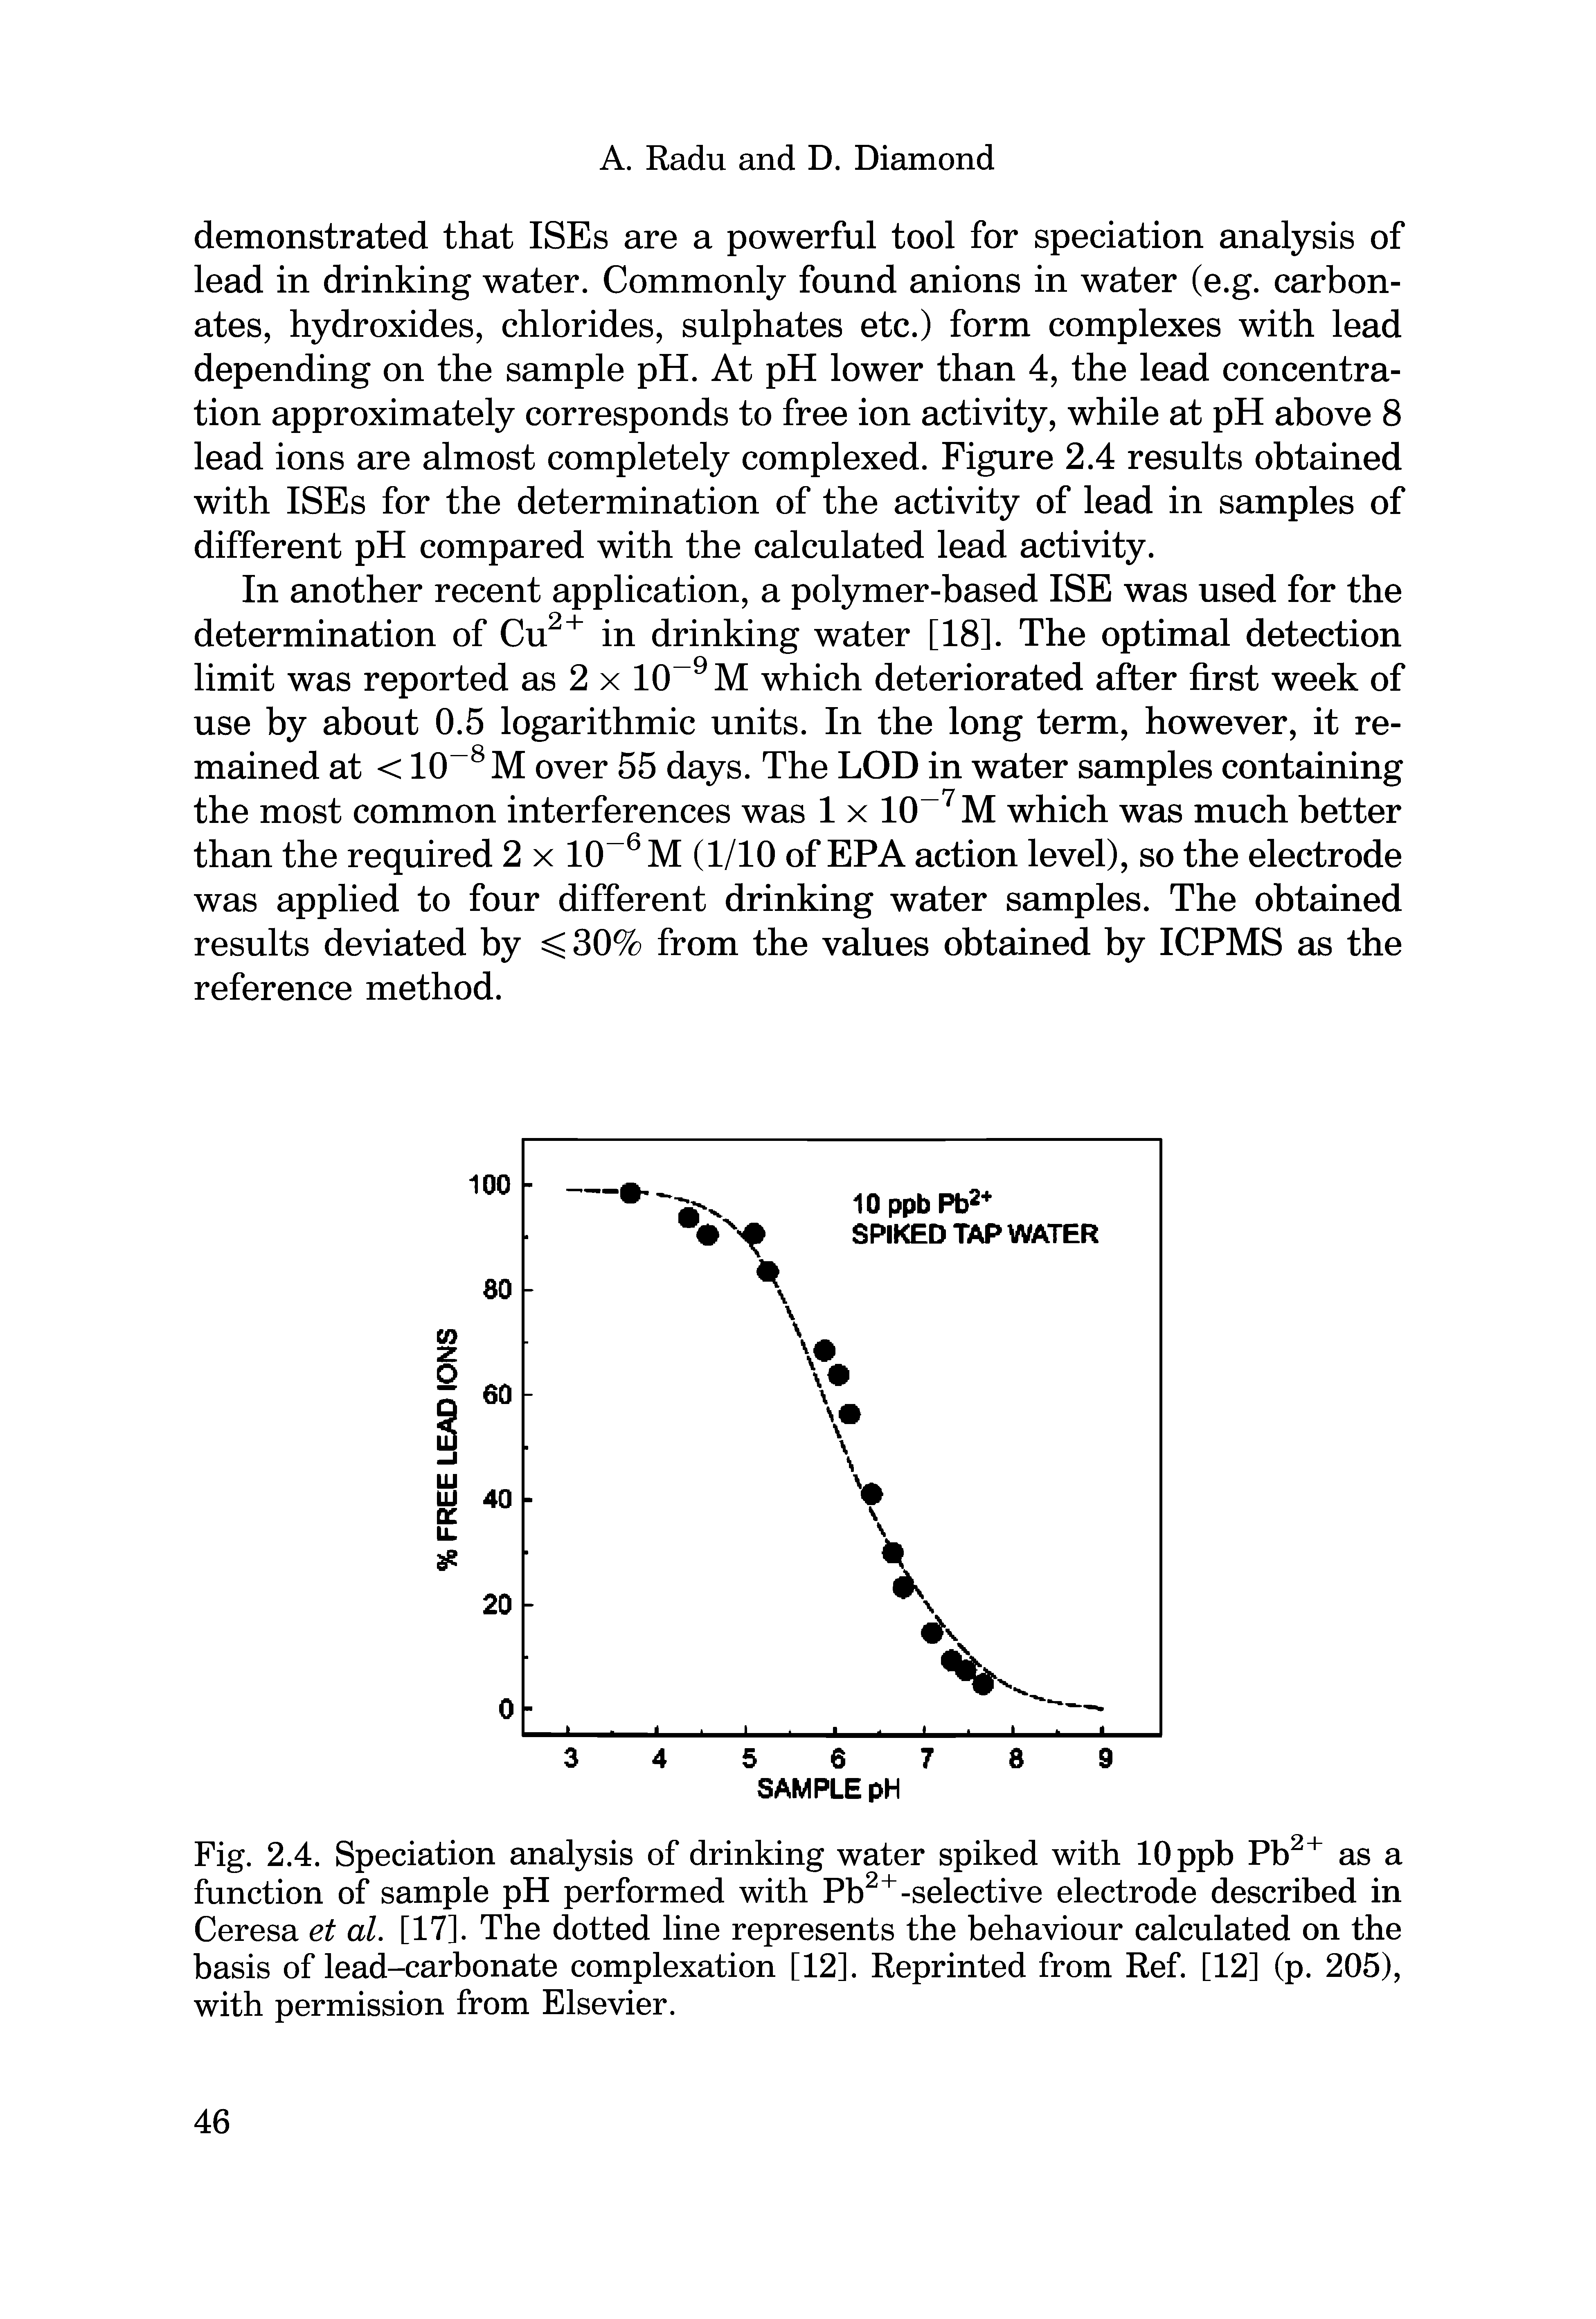 Fig. 2.4. Speciation analysis of drinking water spiked with 10 ppb Pb2+ as a function of sample pH performed with Pb2+-selective electrode described in Ceresa et al. [17]. The dotted line represents the behaviour calculated on the basis of lead-carbonate complexation [12]. Reprinted from Ref. [12] (p. 205), with permission from Elsevier.